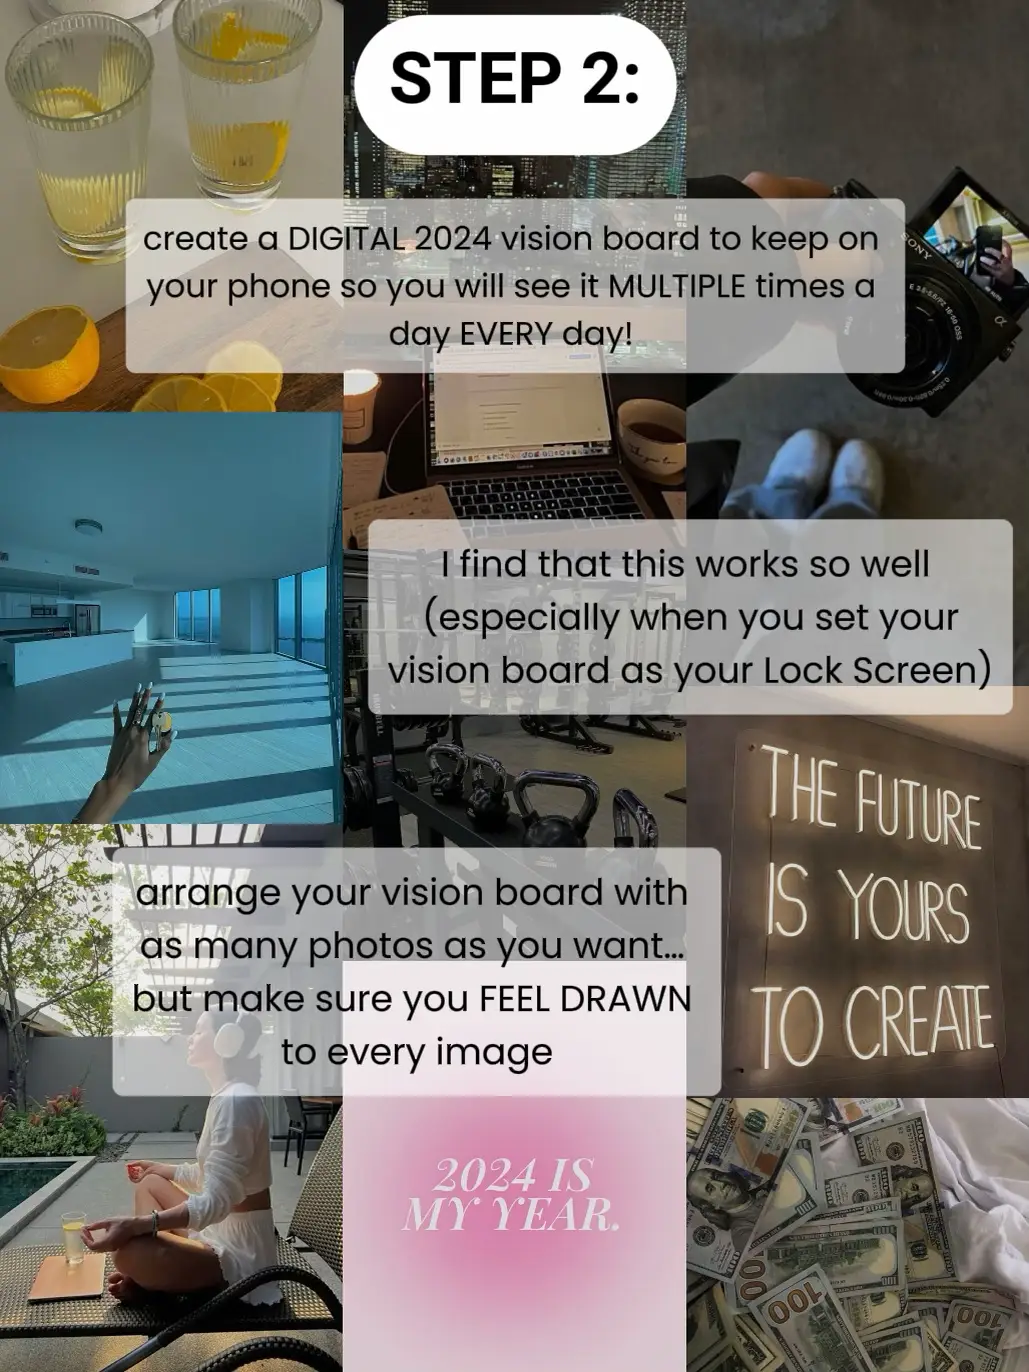 5 Easy Vision Board Ideas for Manifesting Magic in 2023 - Dwell in Magic®